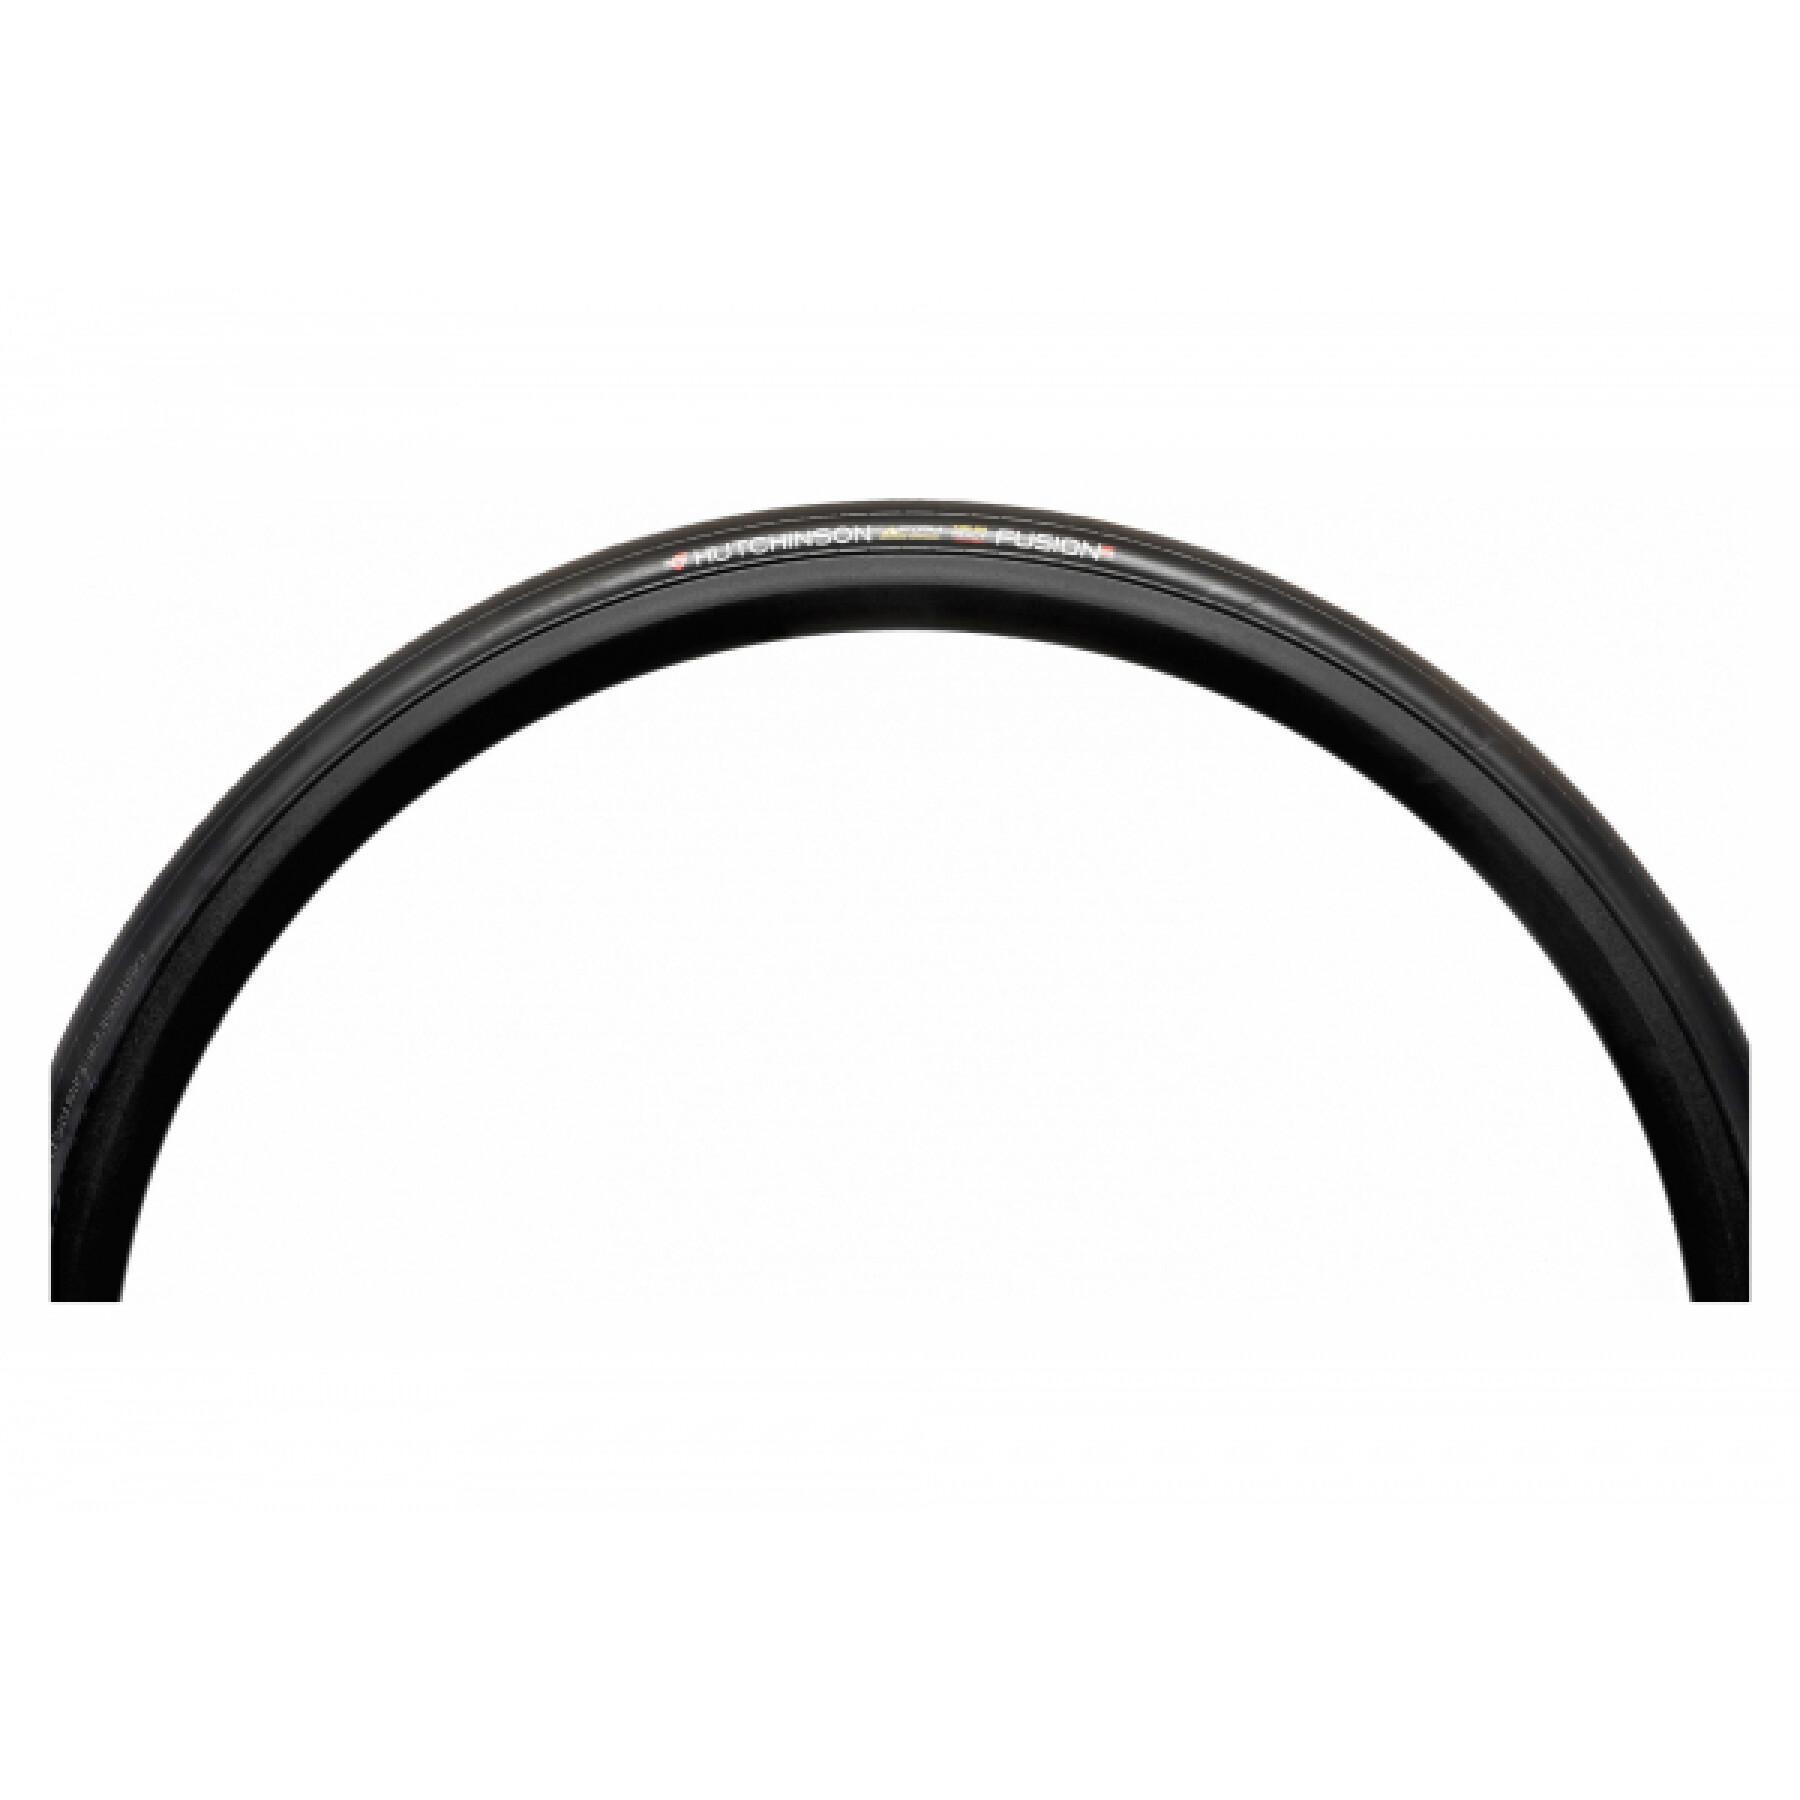 Tire Hutchinson Fusion 5 Storm tubeless Ready performance